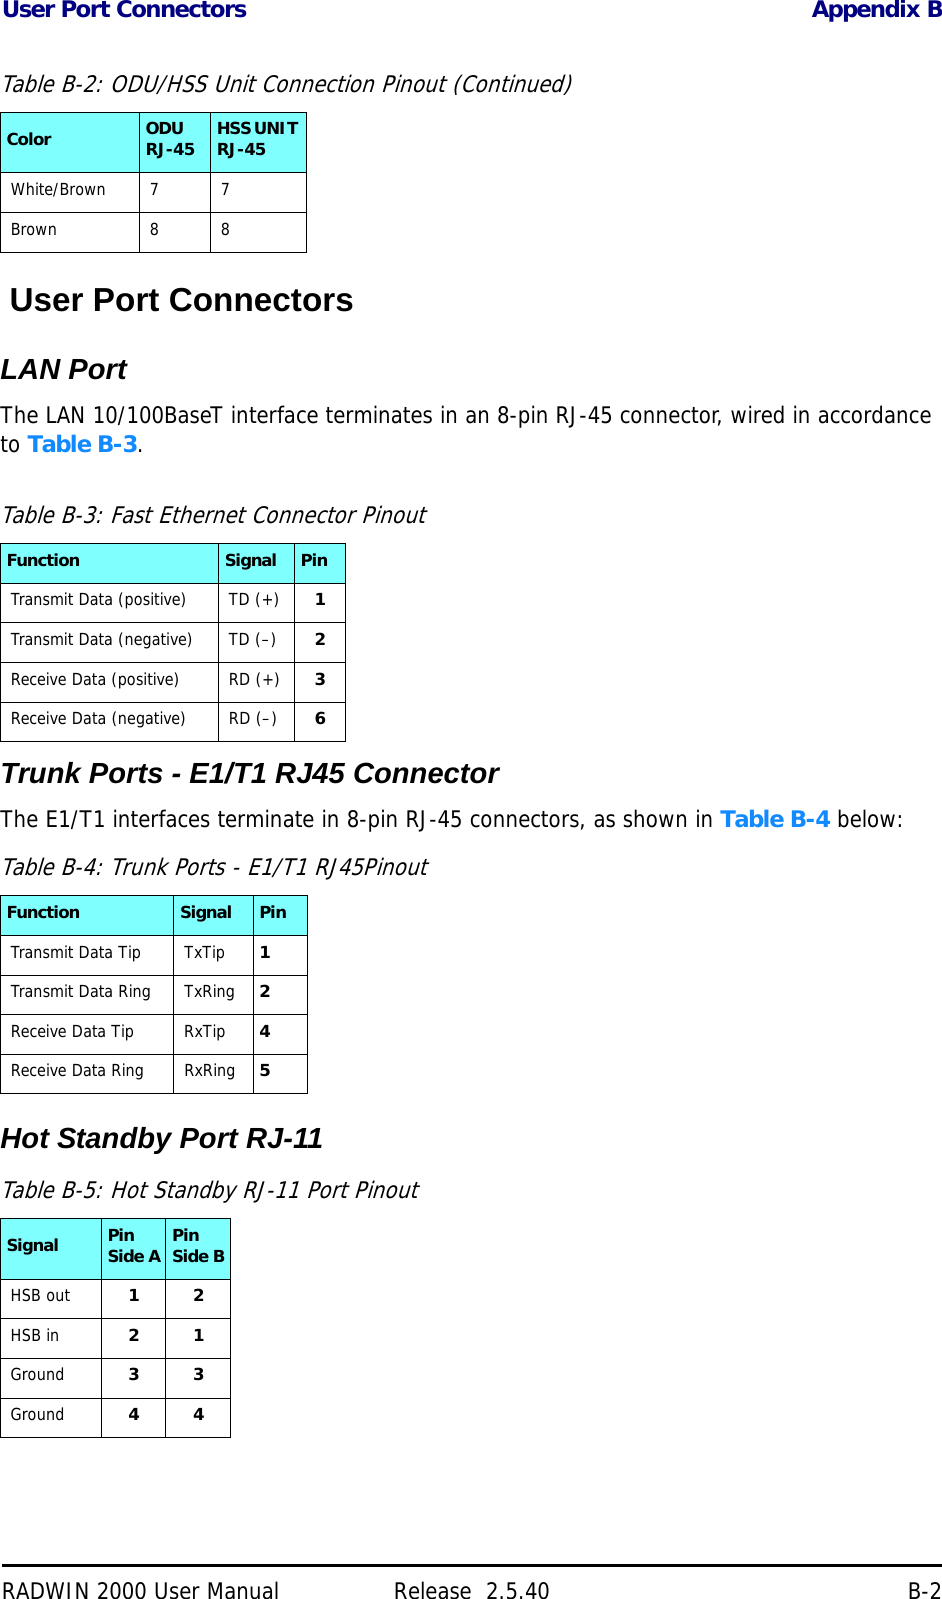 User Port Connectors Appendix BRADWIN 2000 User Manual Release  2.5.40 B-2 User Port ConnectorsLAN PortThe LAN 10/100BaseT interface terminates in an 8-pin RJ-45 connector, wired in accordance to Table B-3.Trunk Ports - E1/T1 RJ45 ConnectorThe E1/T1 interfaces terminate in 8-pin RJ-45 connectors, as shown in Table B-4 below: Hot Standby Port RJ-11White/Brown 7 7 Brown 8 8 Table B-3: Fast Ethernet Connector PinoutFunction Signal Pin Transmit Data (positive) TD (+) 1Transmit Data (negative) TD (–) 2Receive Data (positive) RD (+) 3Receive Data (negative) RD (–) 6Table B-4: Trunk Ports - E1/T1 RJ45PinoutFunction Signal PinTransmit Data Tip TxTip 1Transmit Data Ring TxRing 2Receive Data Tip RxTip 4Receive Data Ring RxRing 5Table B-5: Hot Standby RJ-11 Port PinoutSignal Pin Side A Pin Side BHSB out 12HSB in 21Ground 33Ground 44Table B-2: ODU/HSS Unit Connection Pinout (Continued)Color ODU RJ-45 HSS UNIT RJ-45